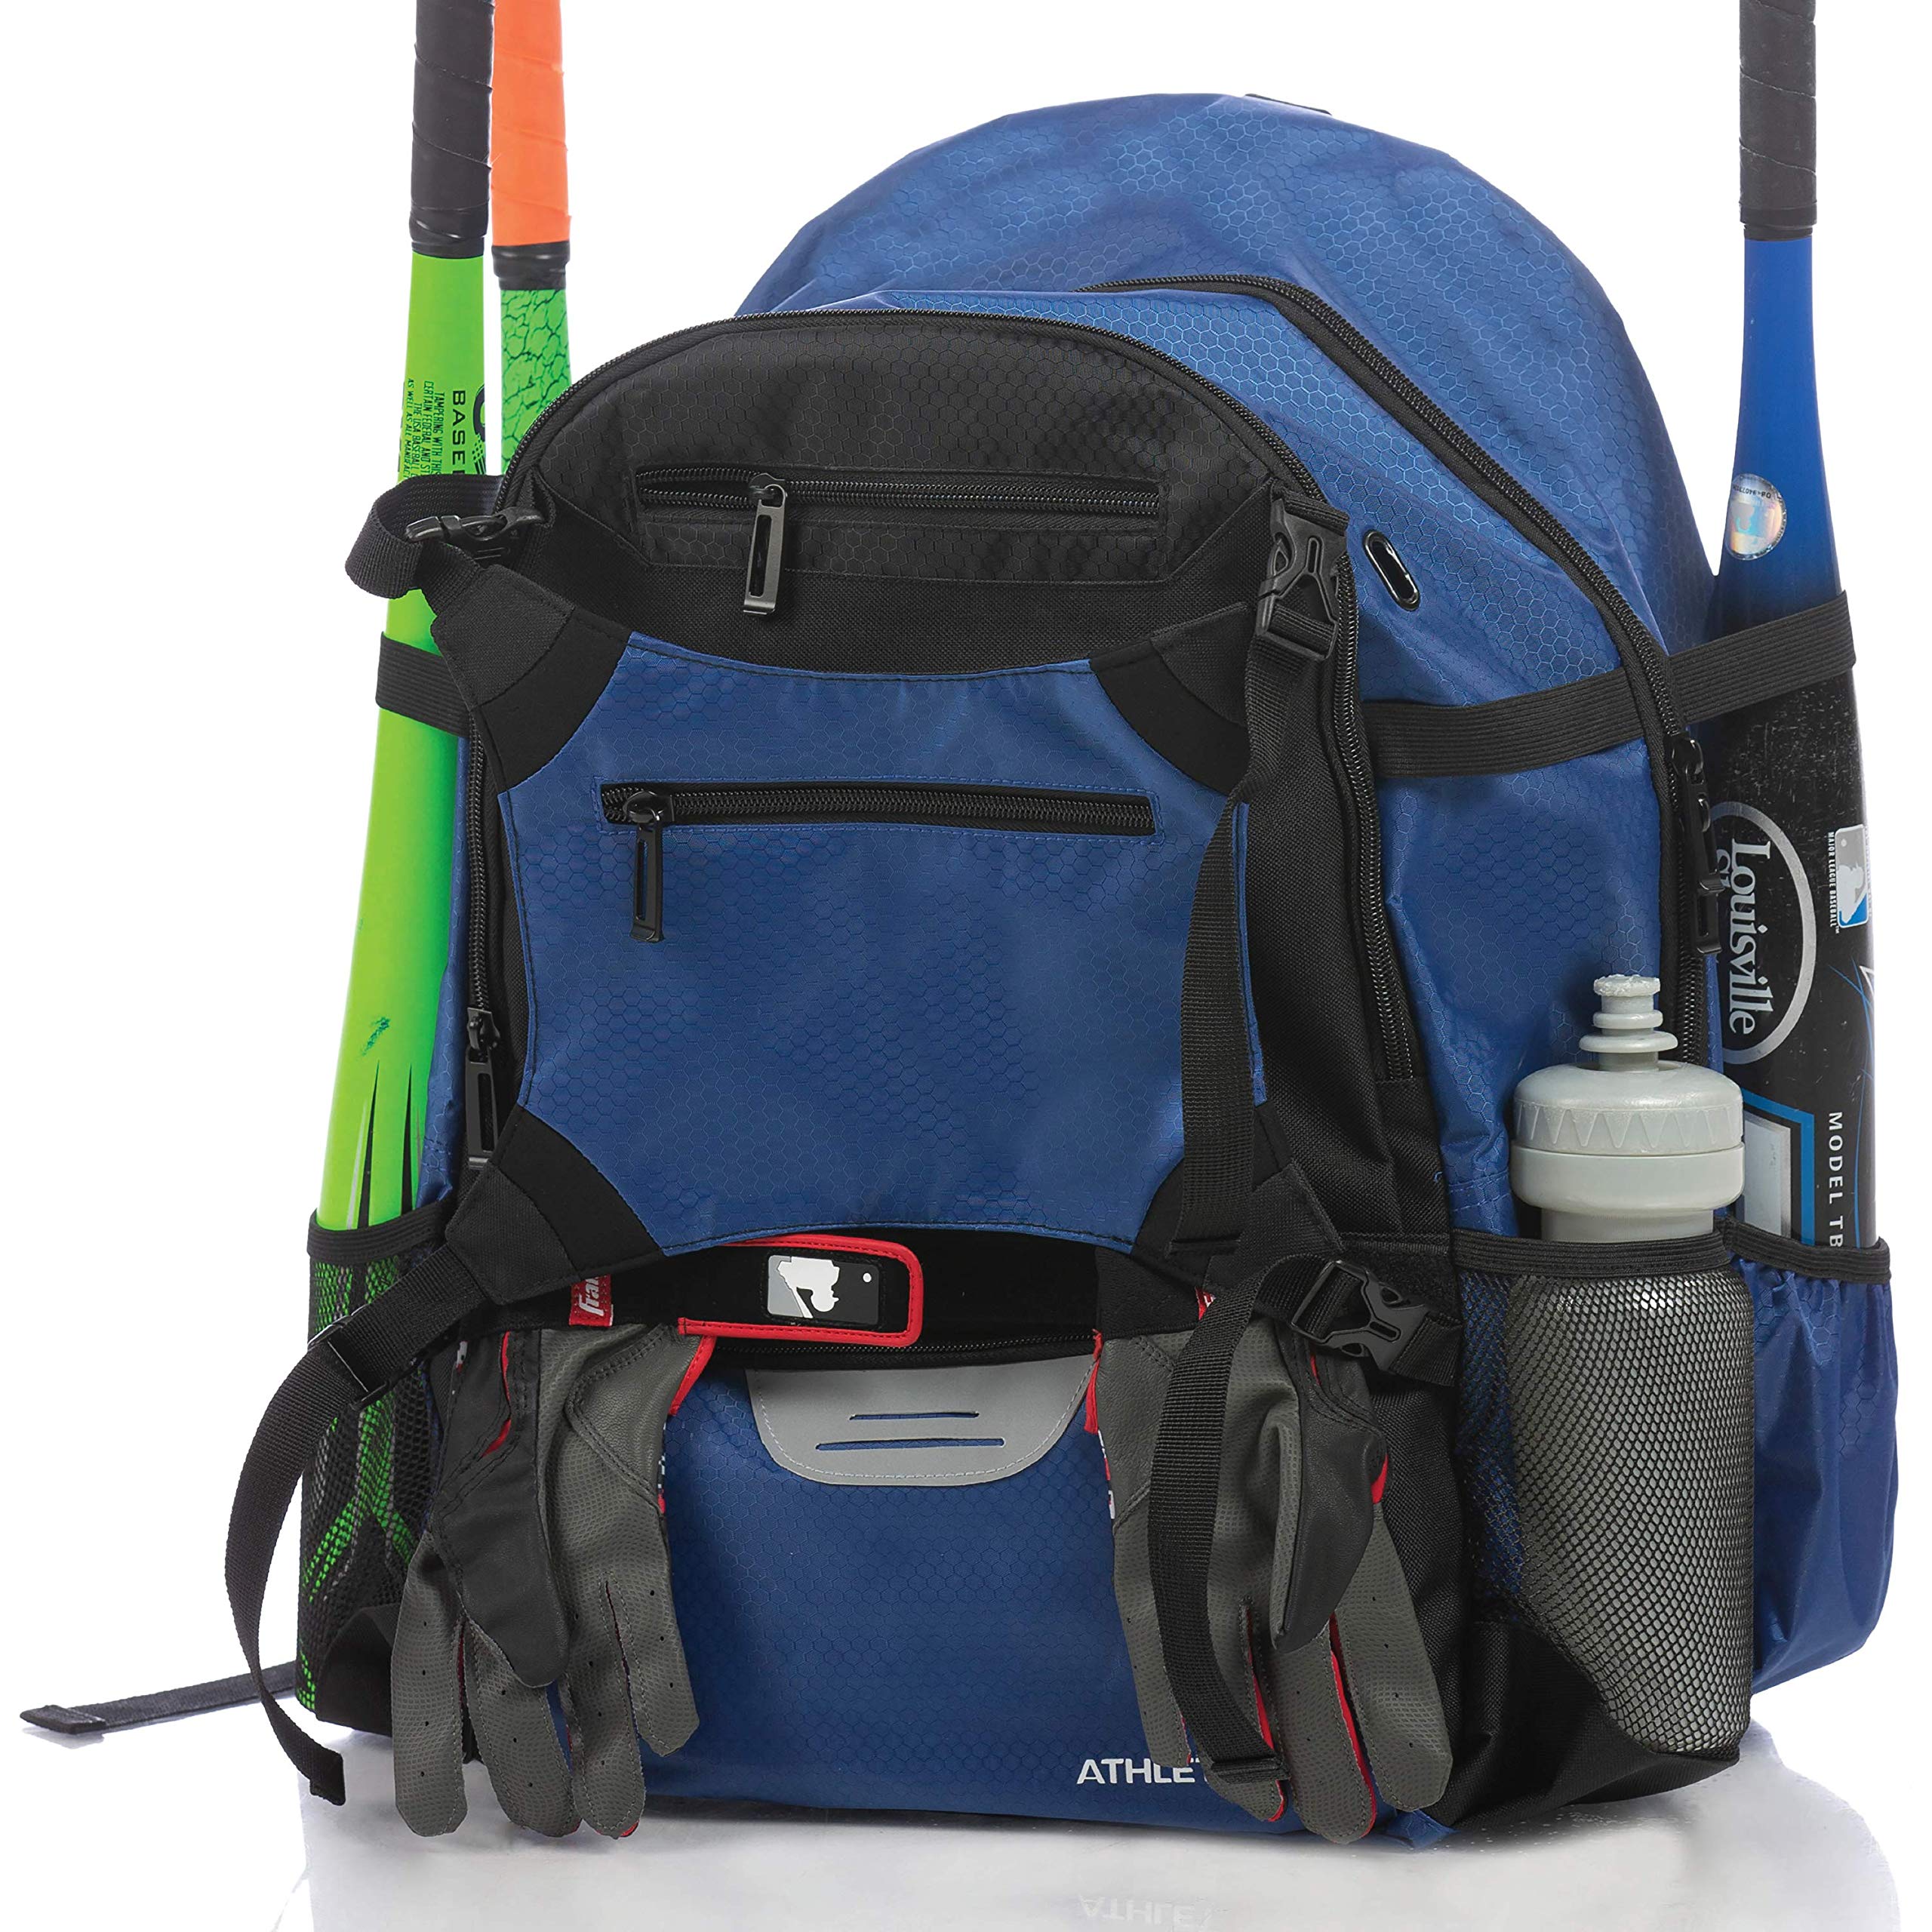 Athletico Advantage Baseball Bag - Baseball Backpack with External Helmet Holder for Baseball, T-Ball & Softball Equipment & Gear for Youth and Adults | Holds Bat, Helmet, Glove, Shoes (Blue)  - Very Good